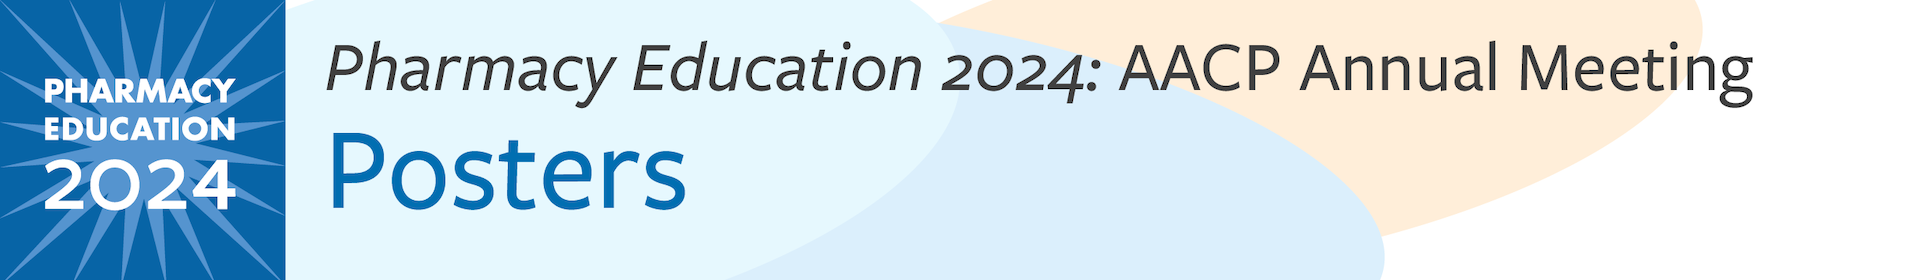 Pharmacy Education 2024 Posters